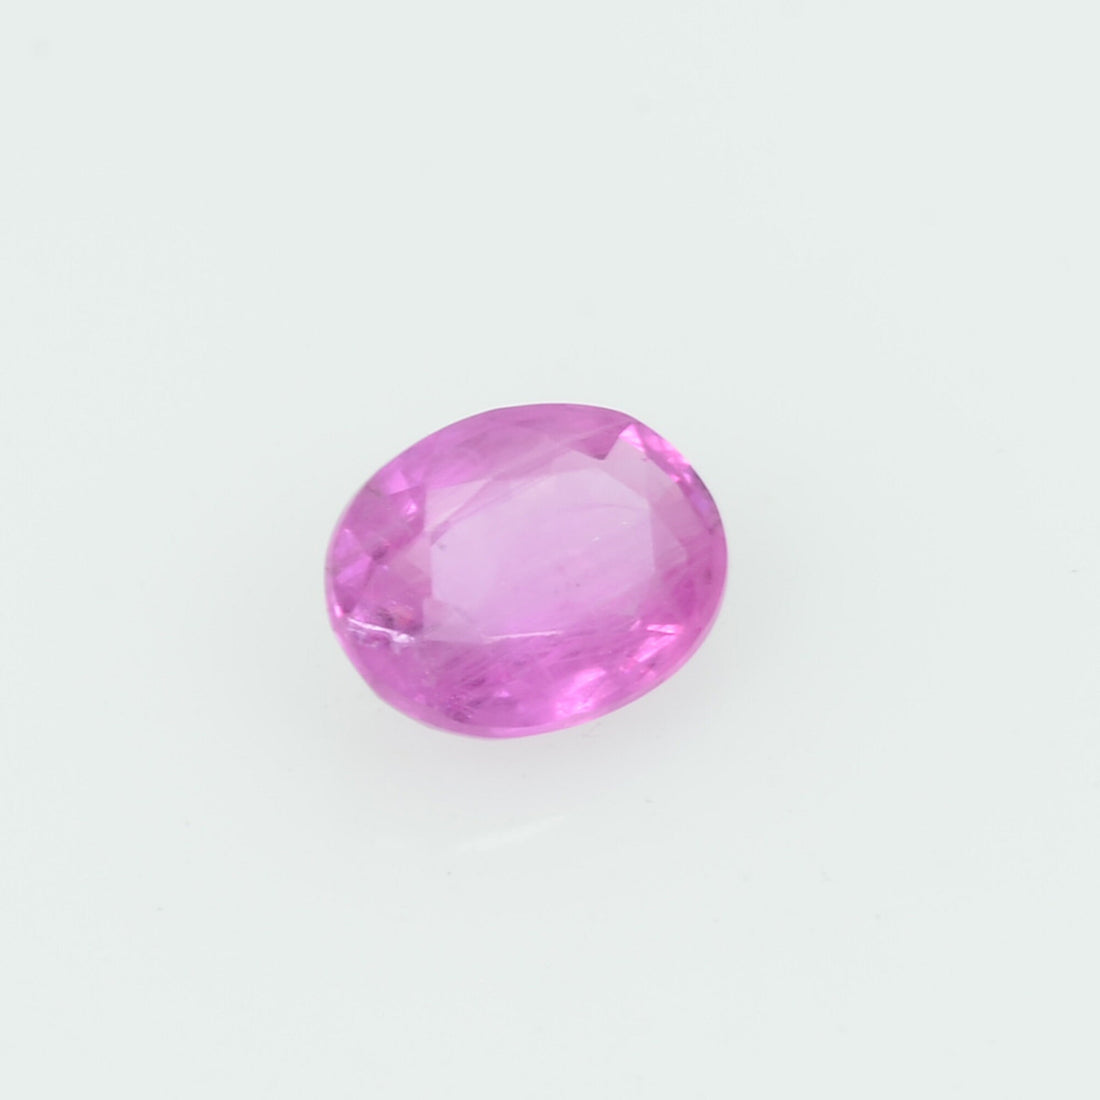 0.23 cts Natural Pink Sapphire Loose Gemstone oval Cut